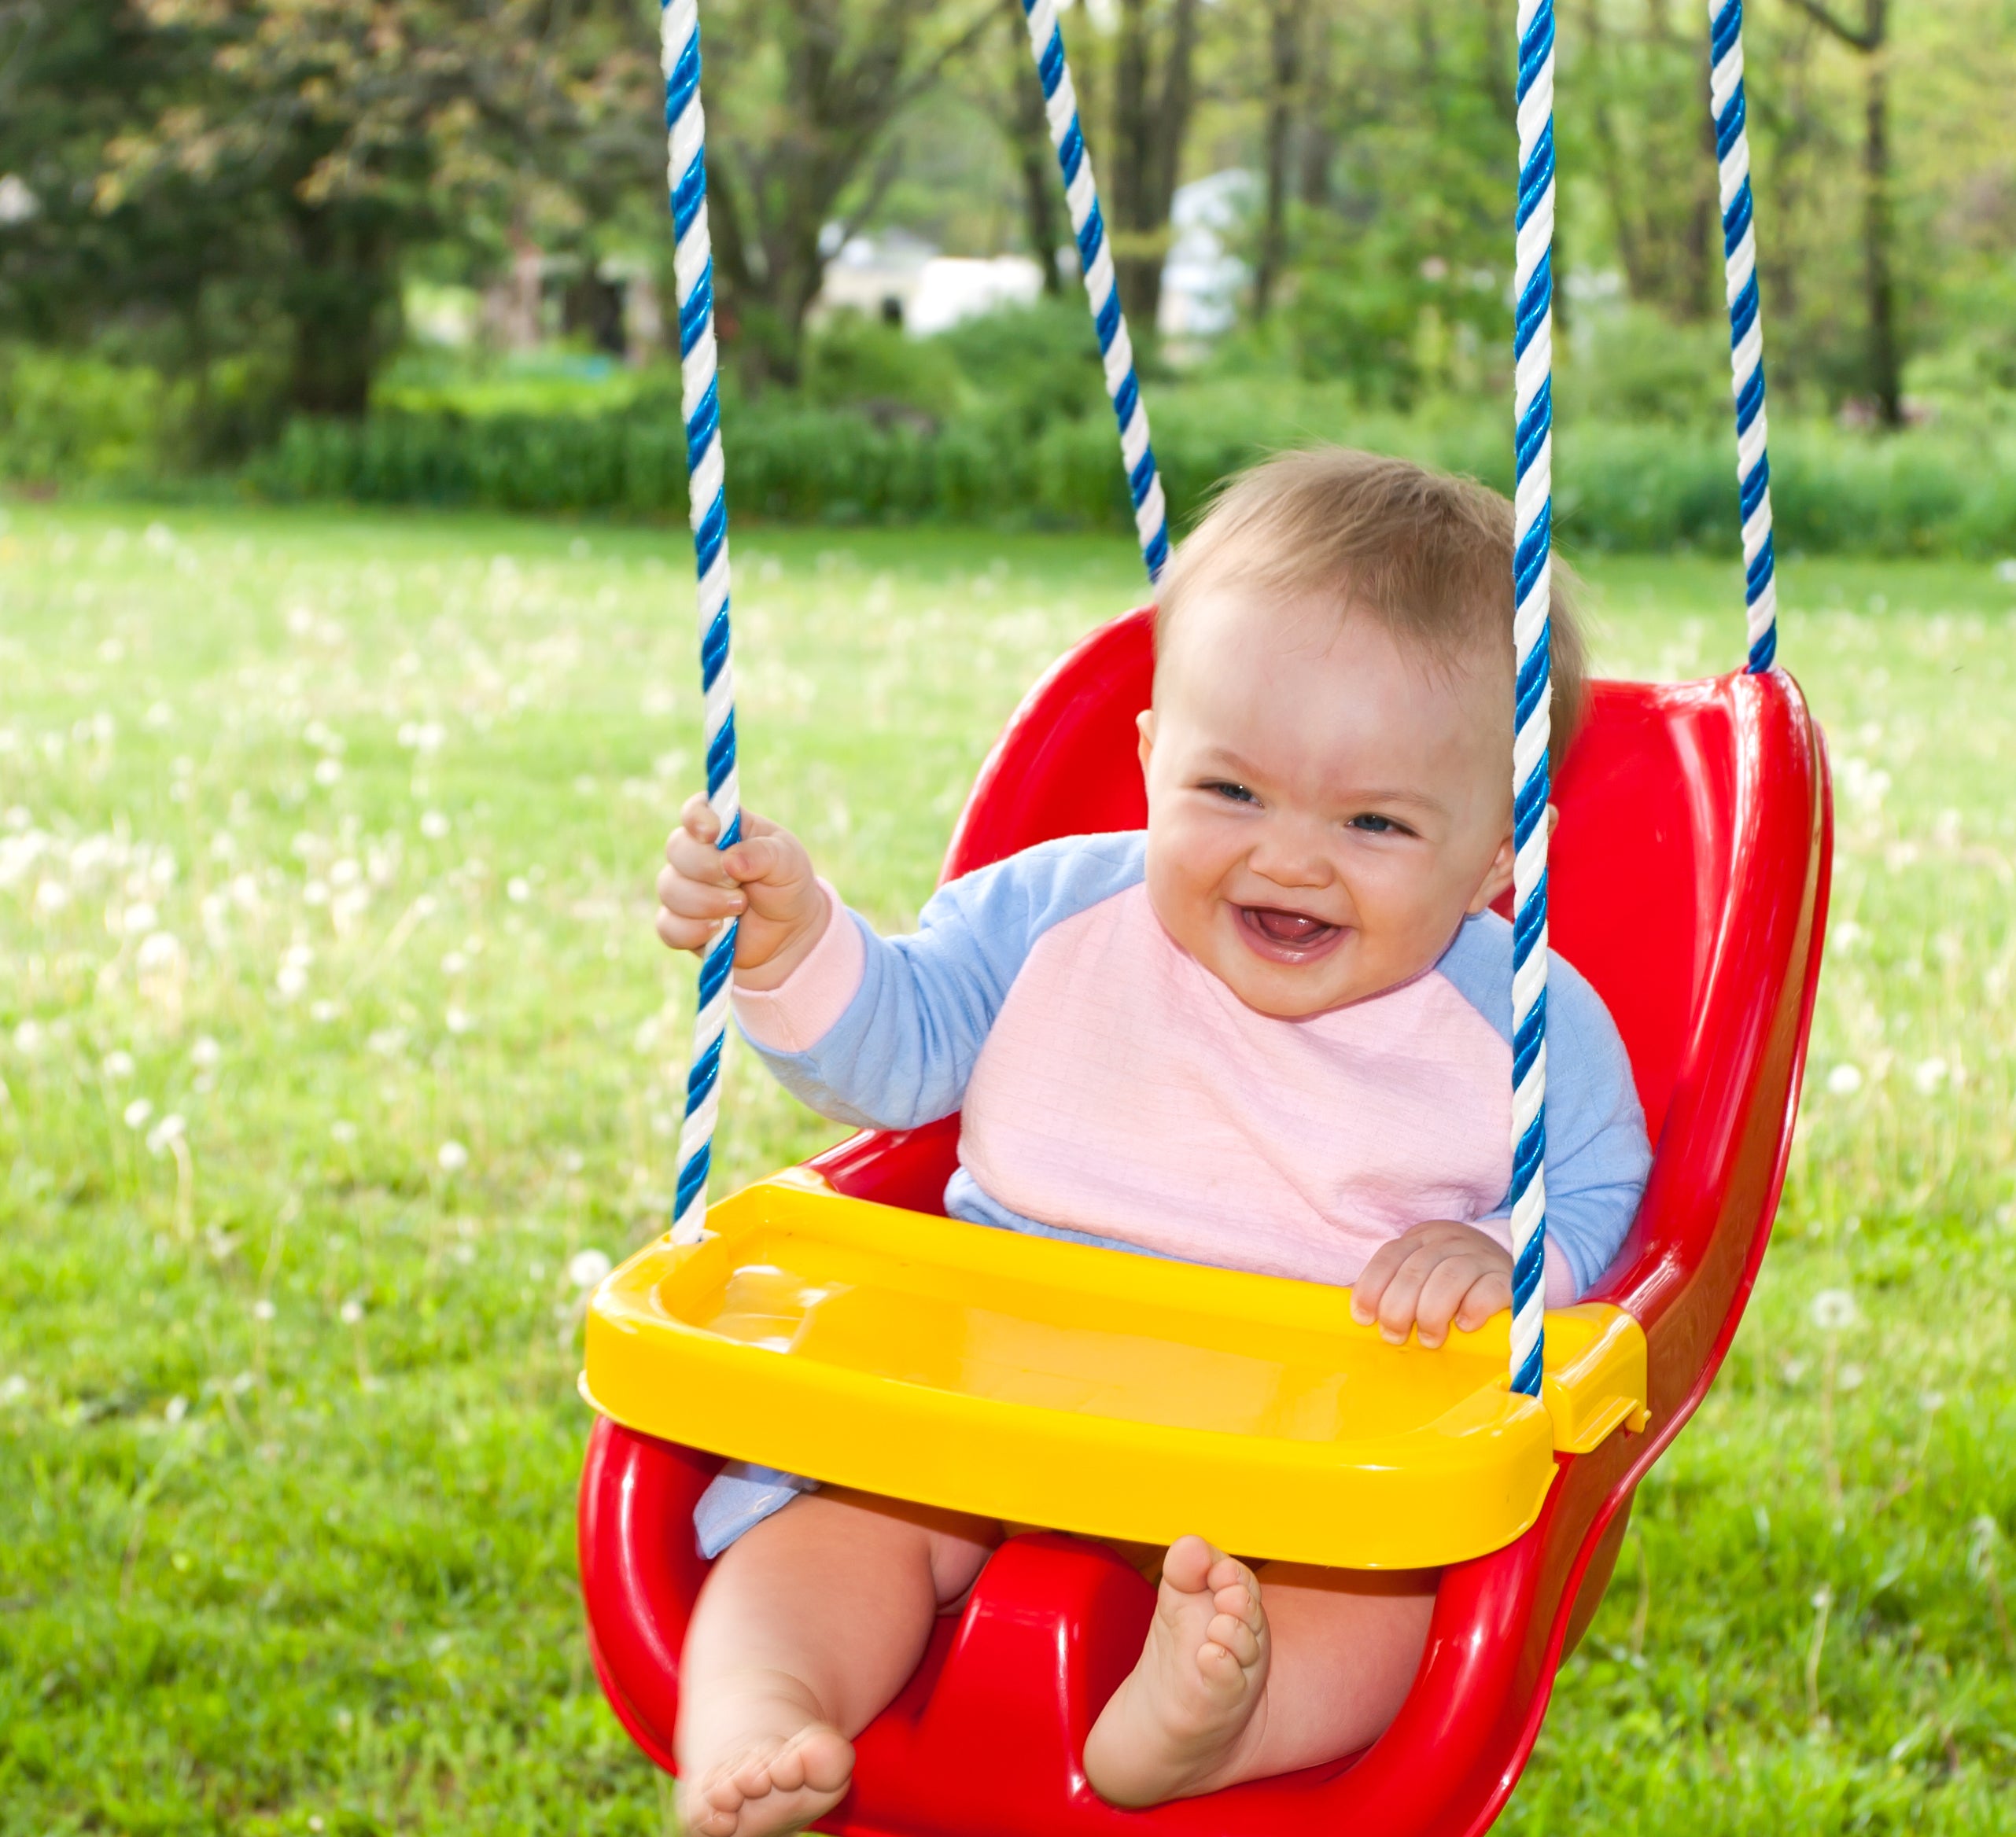 A baby swinging in a baby swing in her front yard. If your child has outgrown their swing, simply replace the seat with a plant pot to repurpose it!